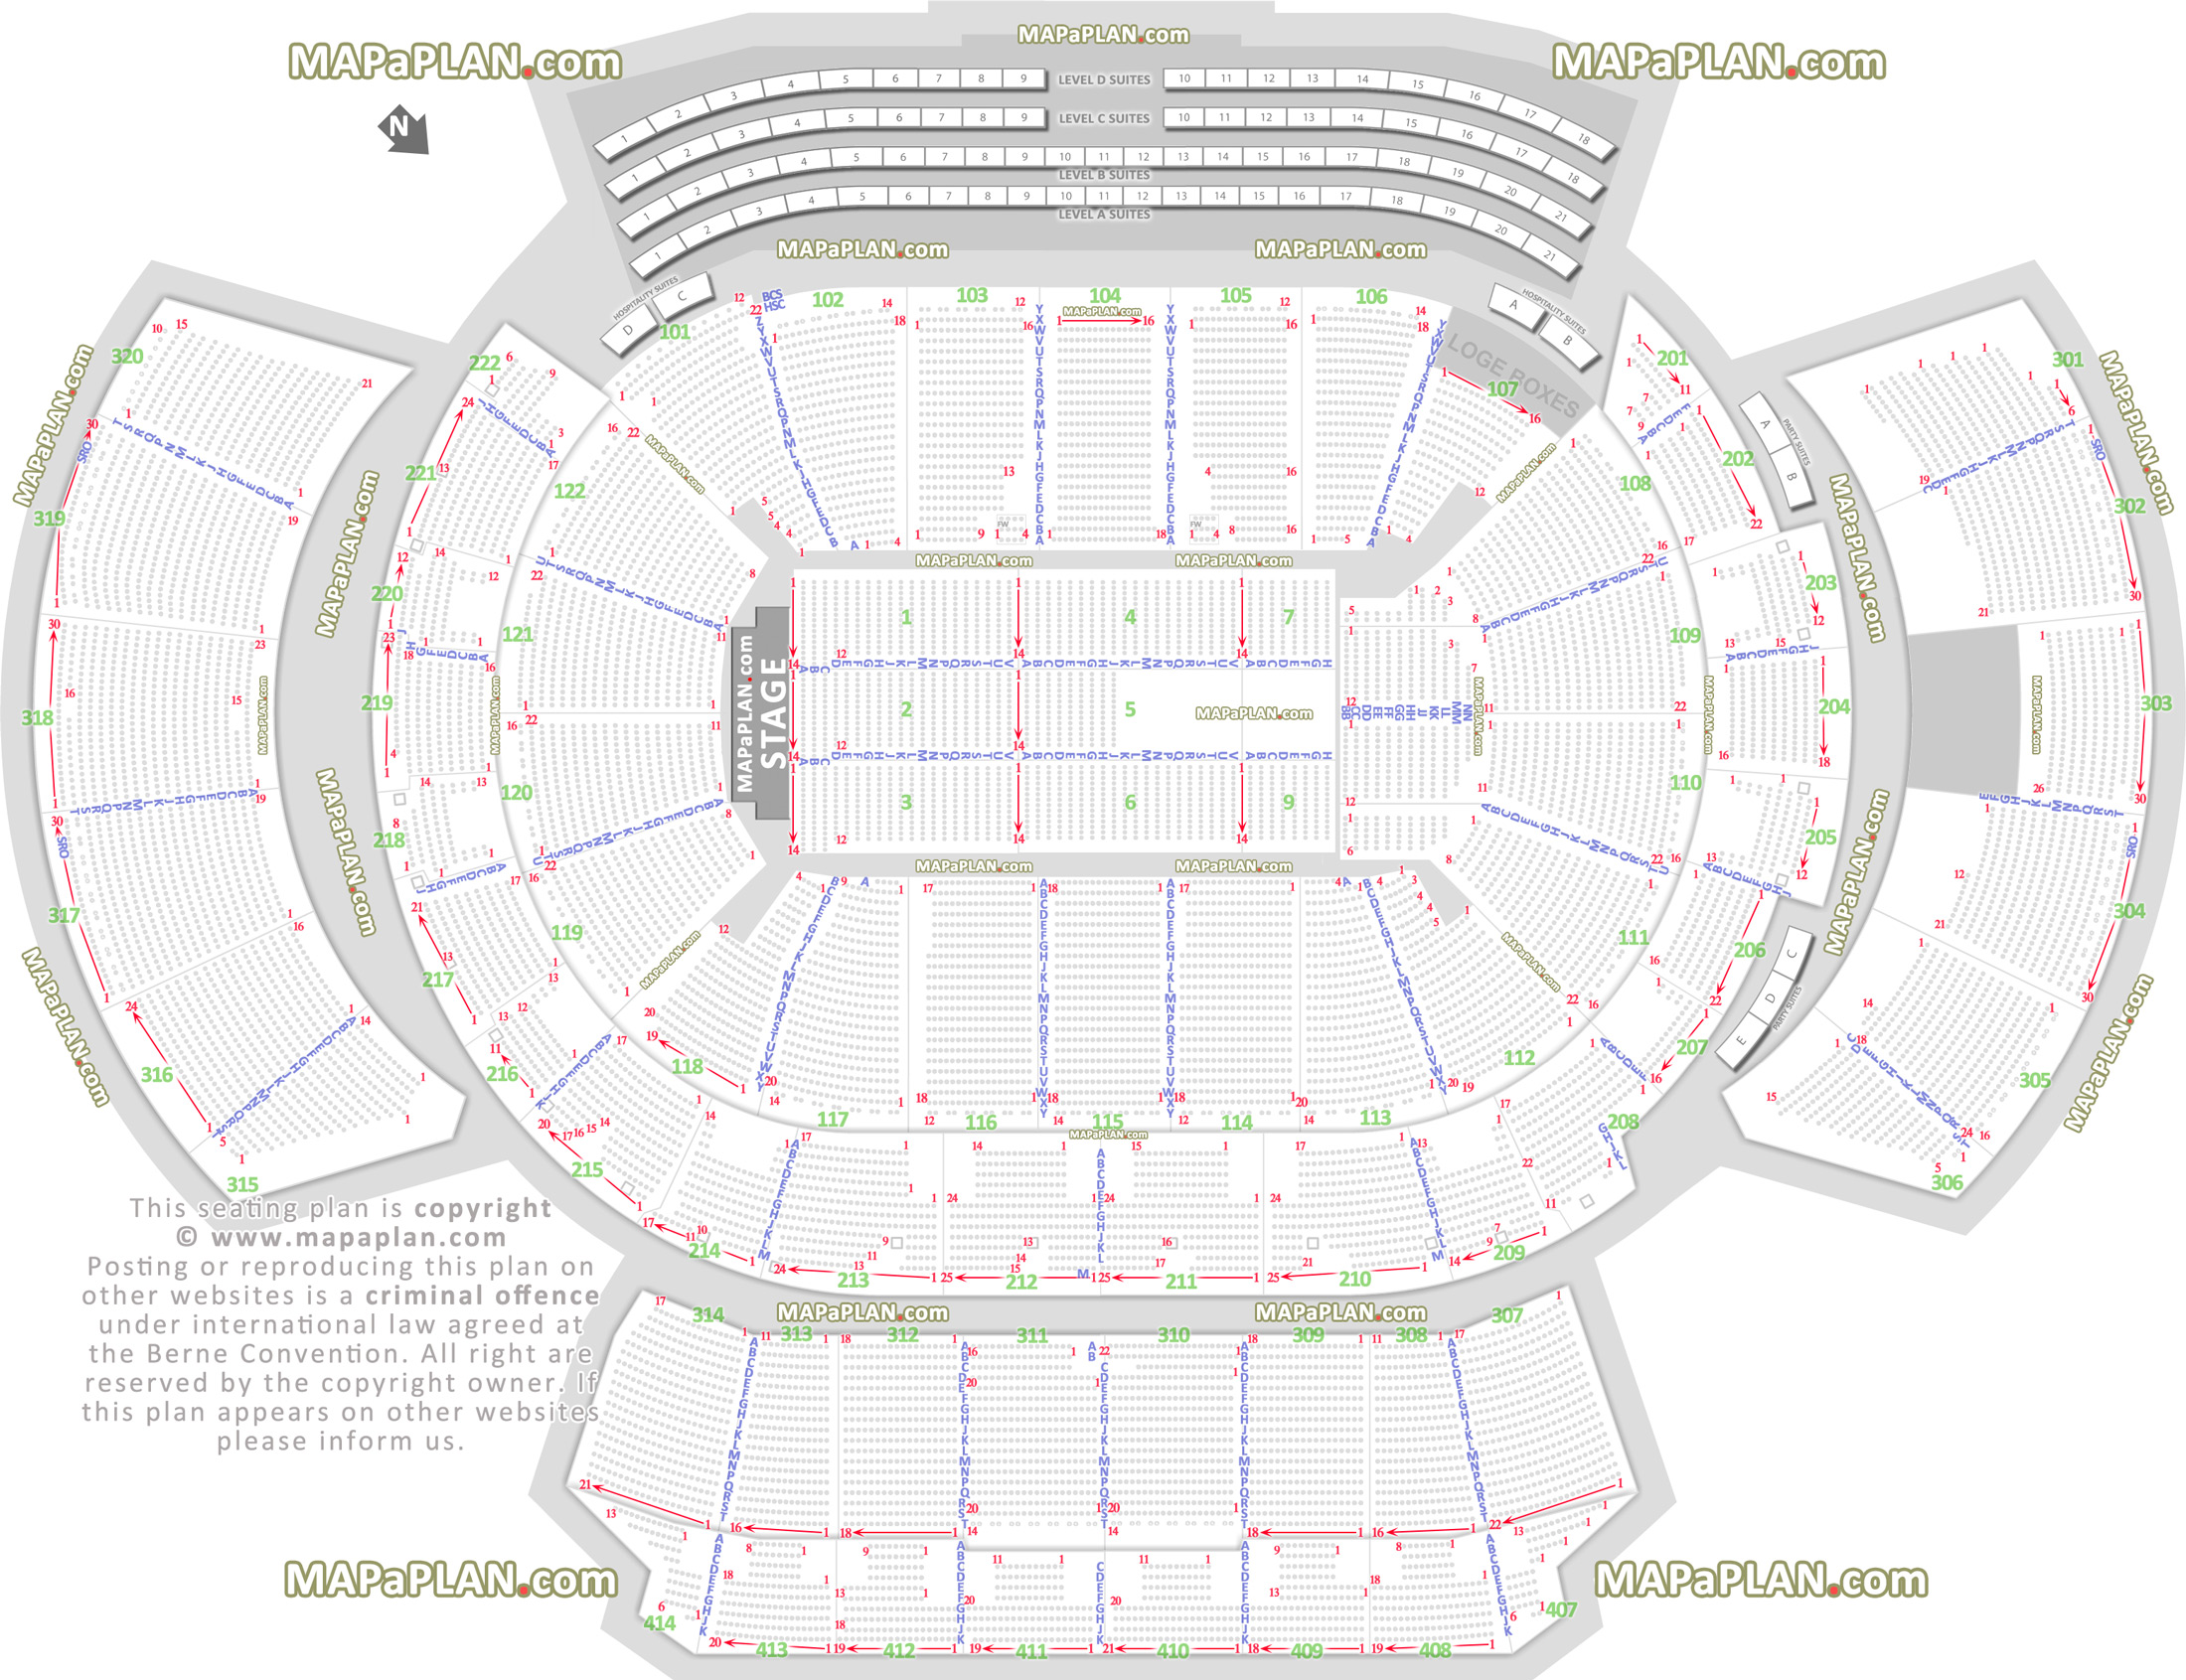 detailed seat row numbers end stage full concert sections floor plan arena lower upper level layout Atlanta State Farm Arena seating chart